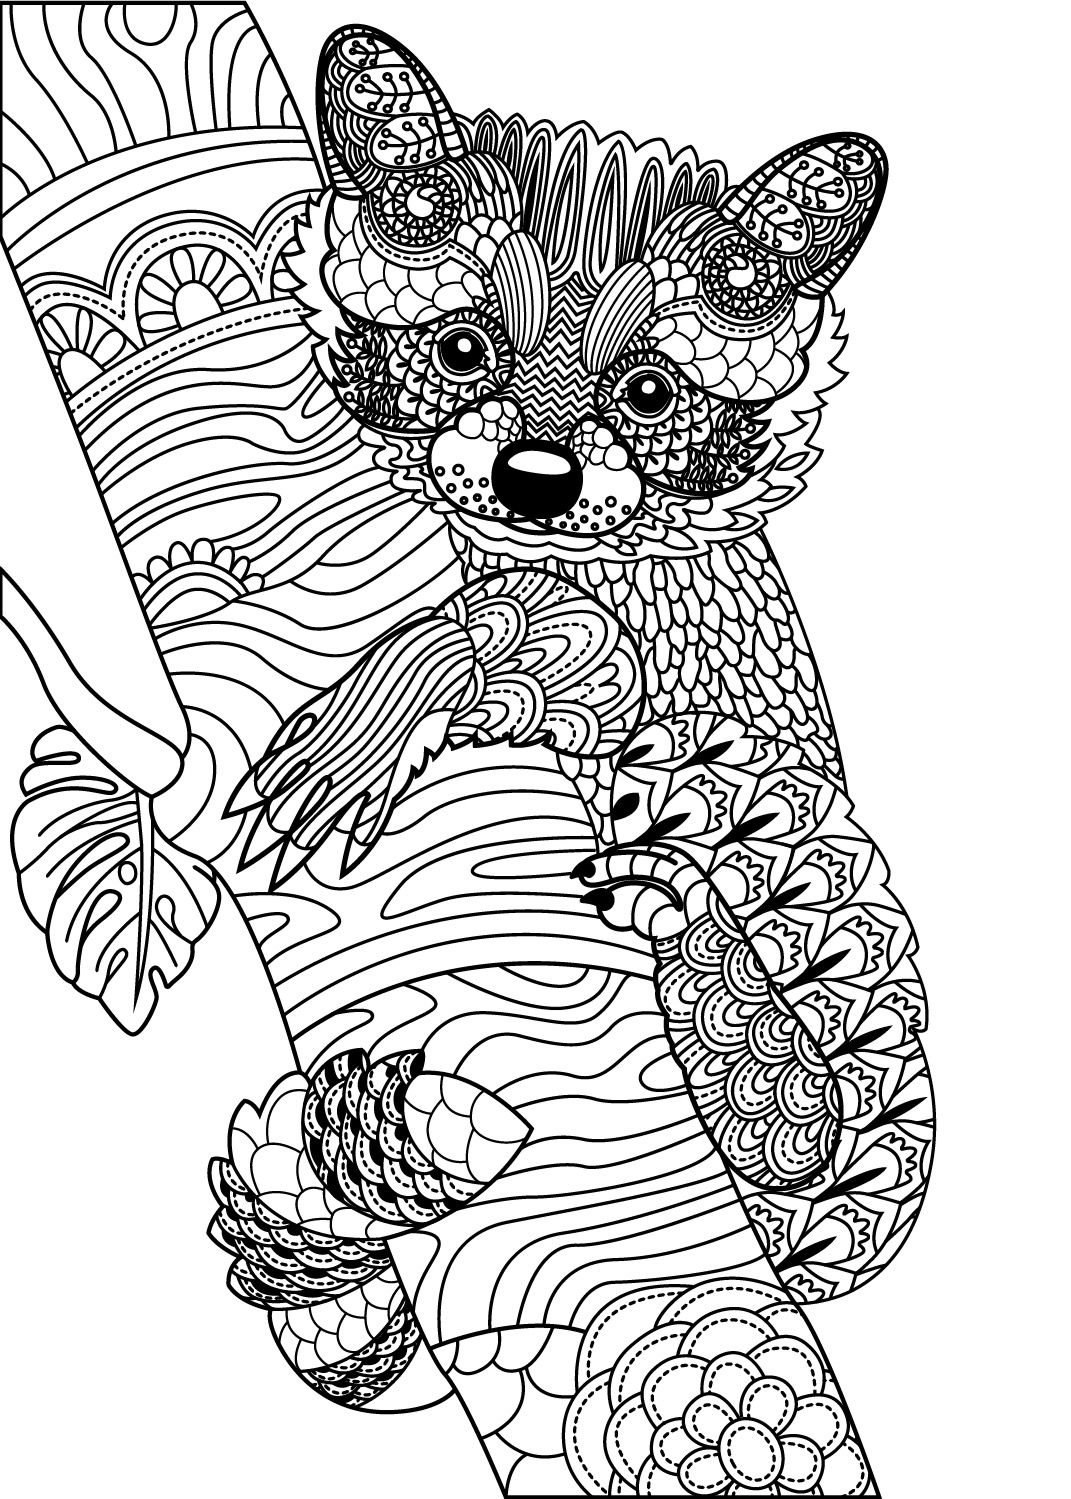 Wild animals to color colorish free coloring app for adults by goodsofttech adult coloring animals animal coloring books animal coloring pages